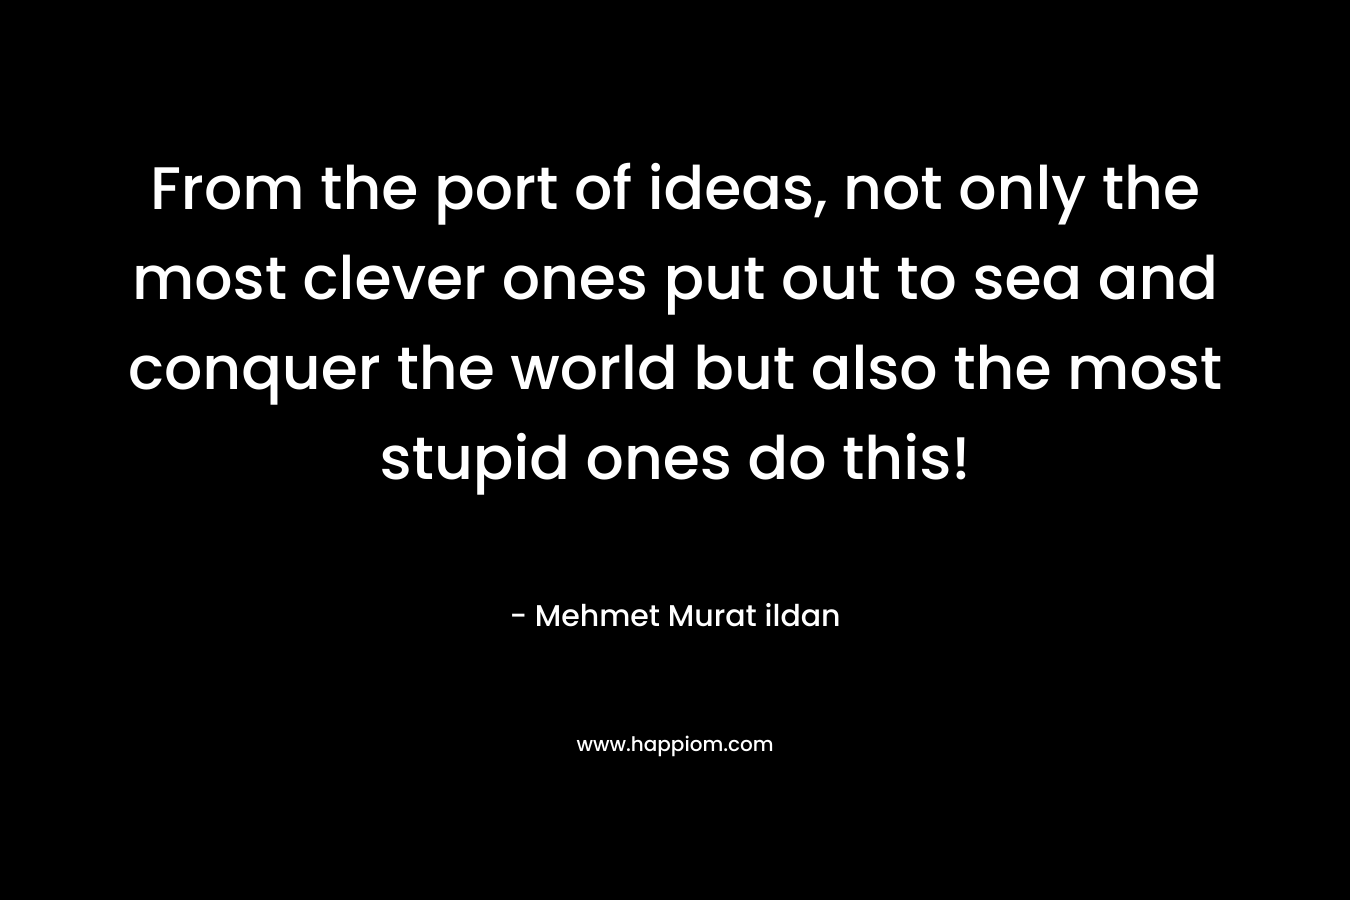 From the port of ideas, not only the most clever ones put out to sea and conquer the world but also the most stupid ones do this! – Mehmet Murat ildan